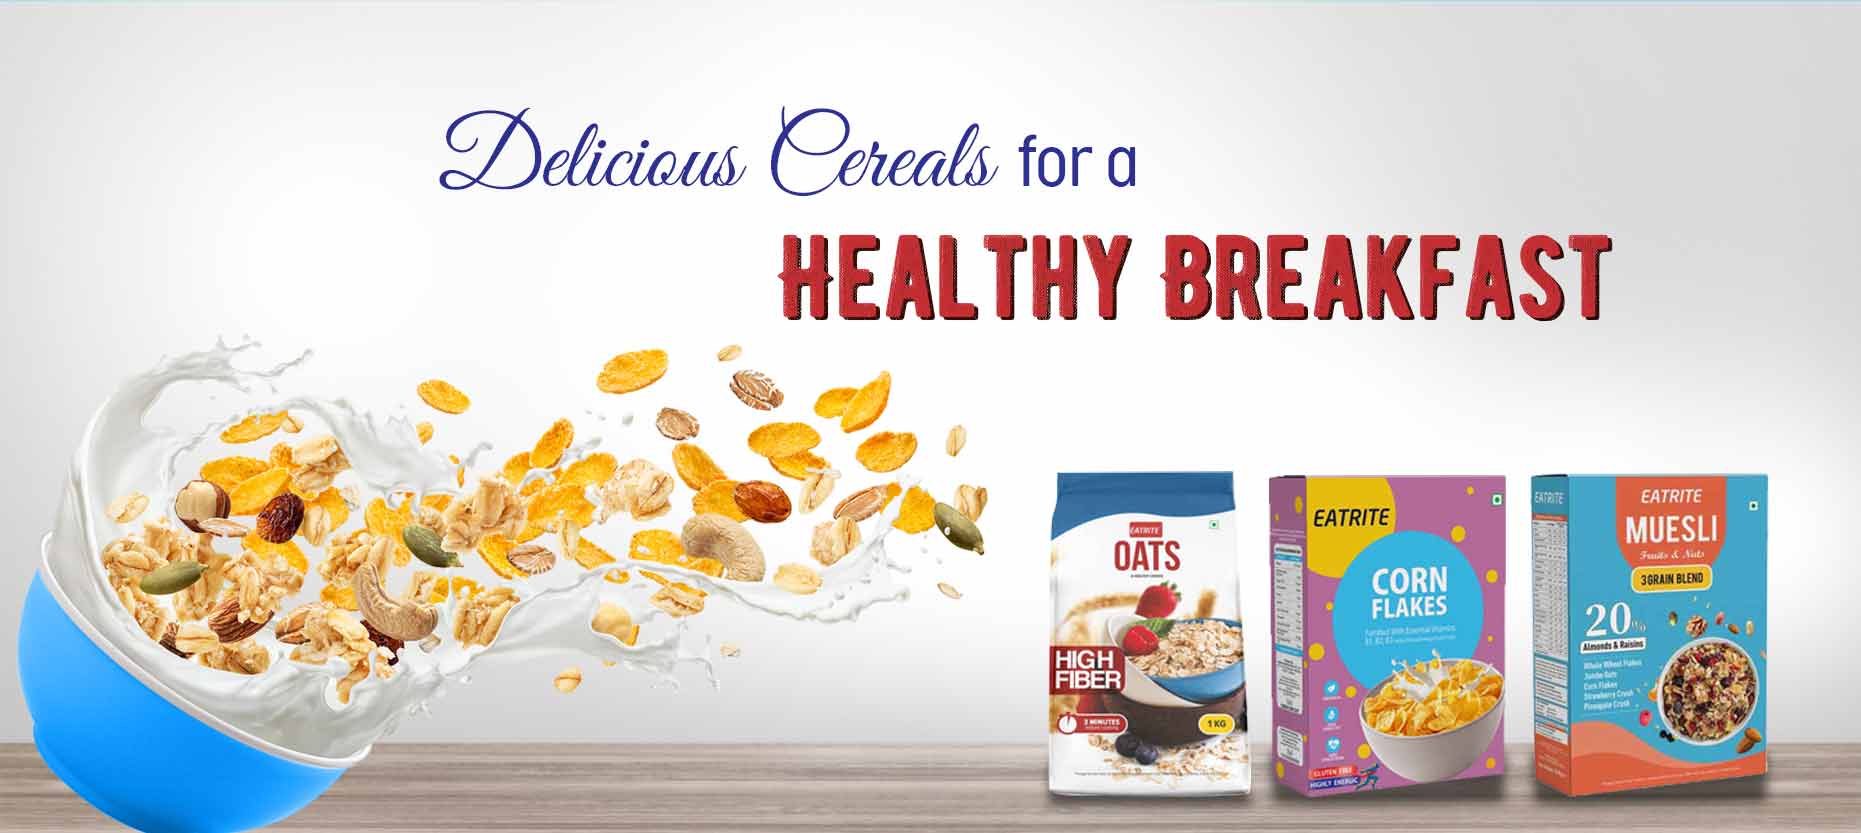 Delicious Cereals for a Healthy Breakfast in India